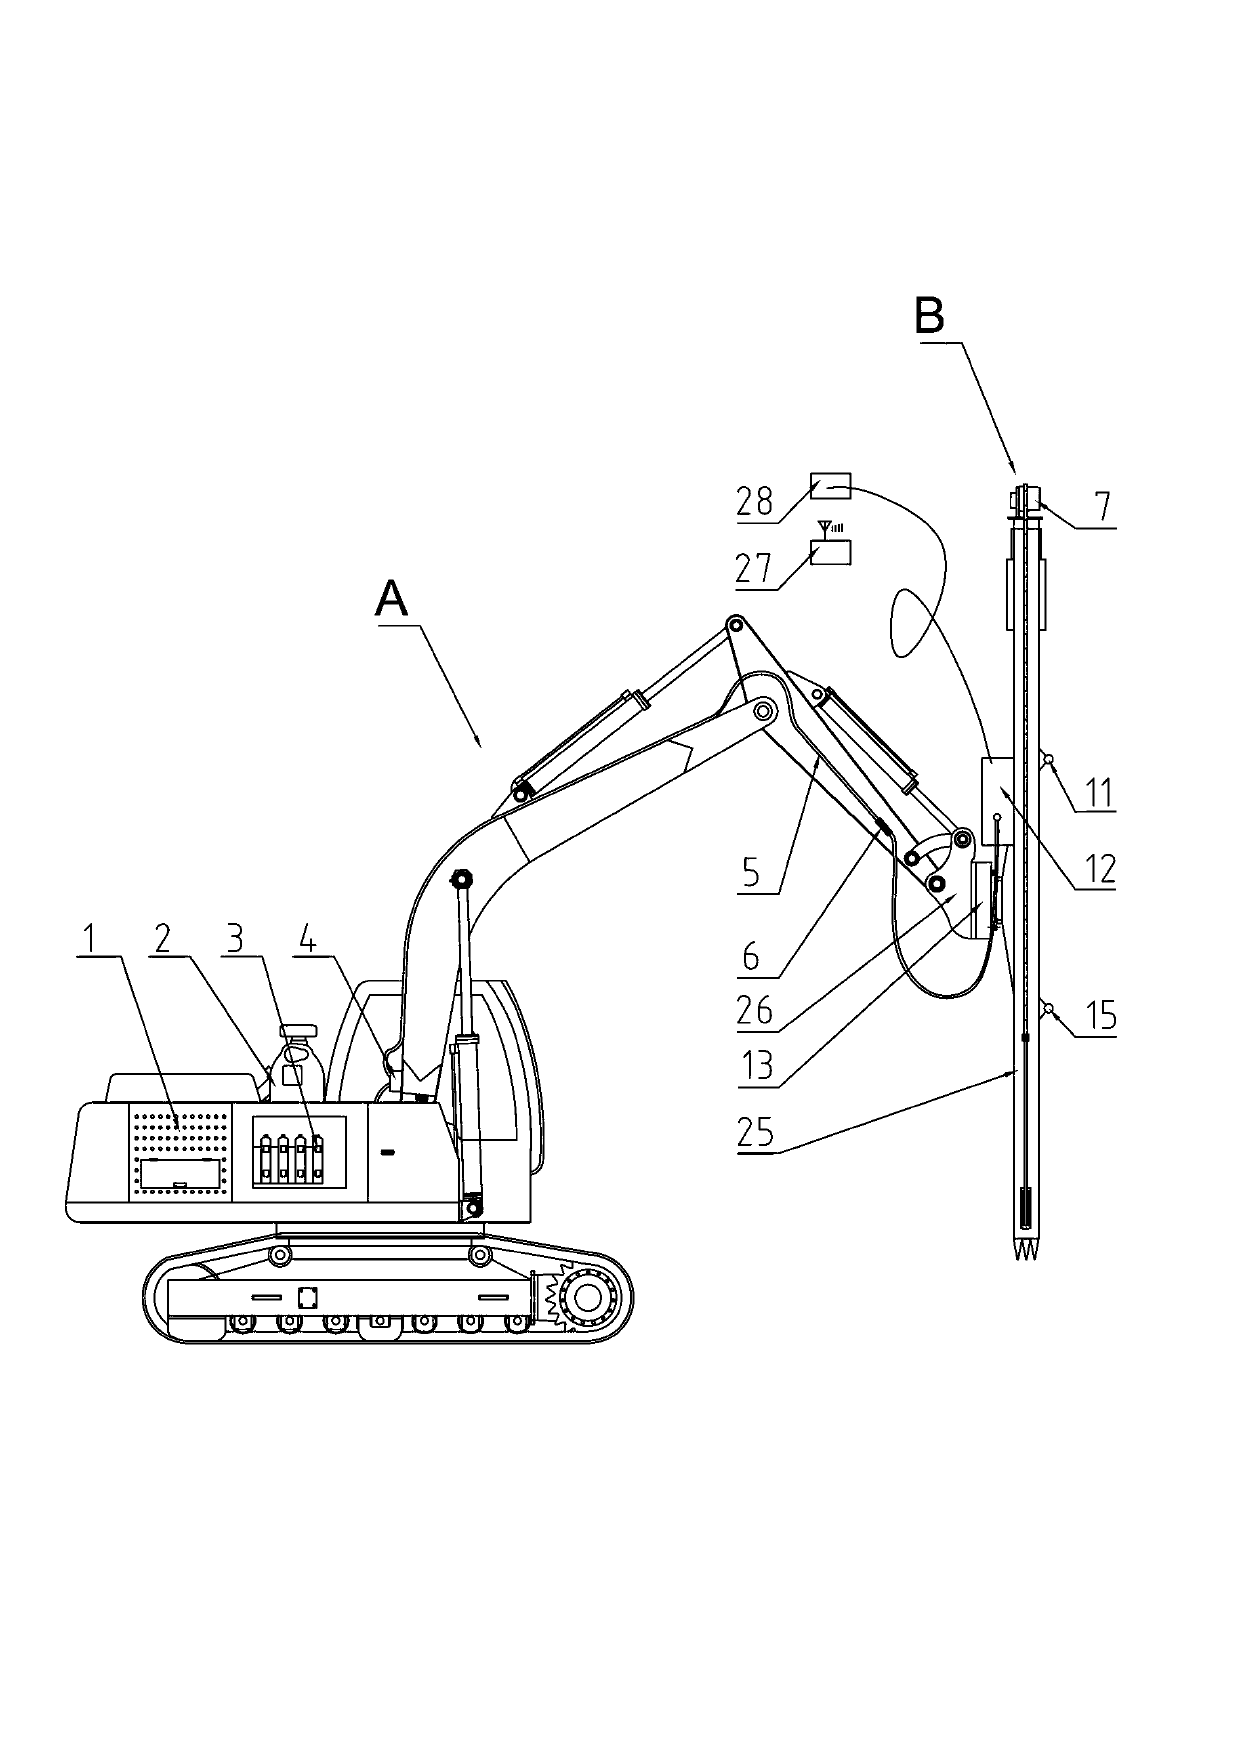 Full-hydraulic rock-drilling excavator using hydraulic excavator for production